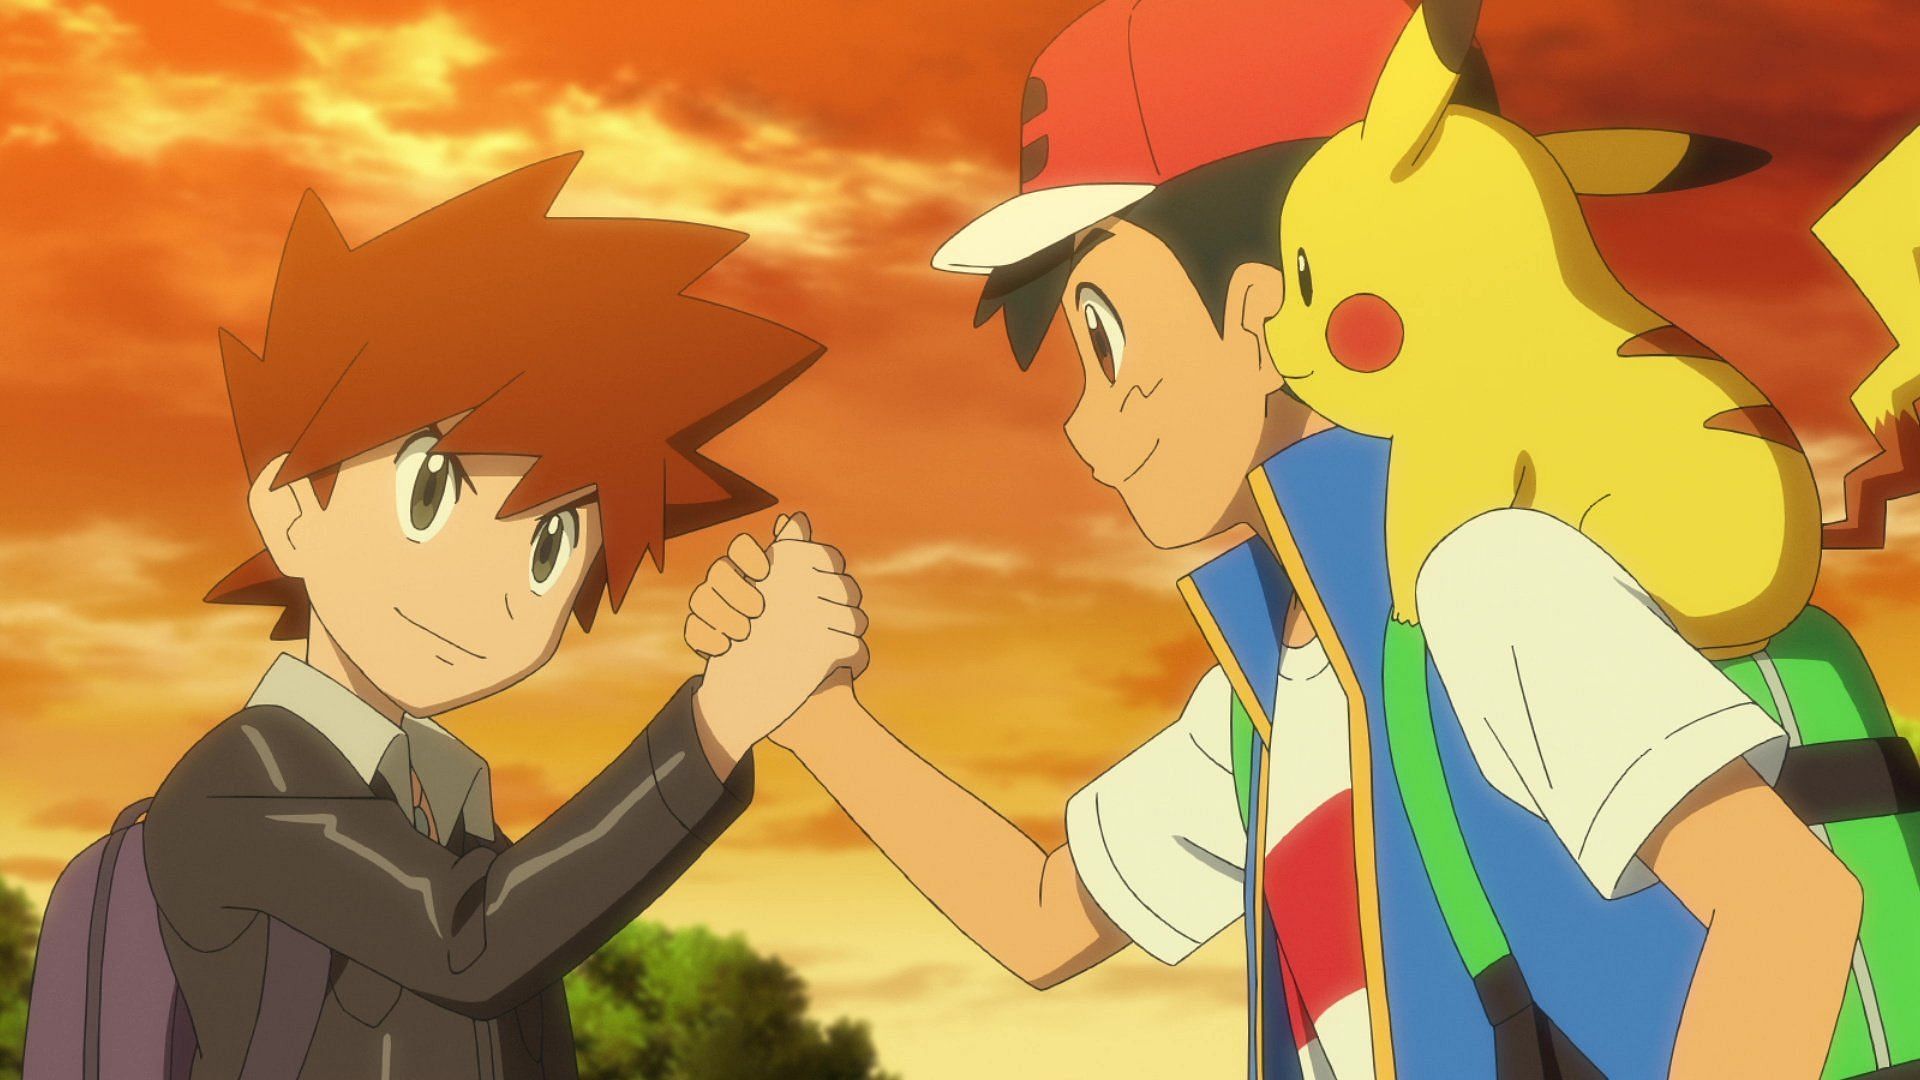 Even if they started hating each other, Ash and gary are close and dear friends (Image credit: OLM Incorporated, Pokemon Master Journeys: The series)